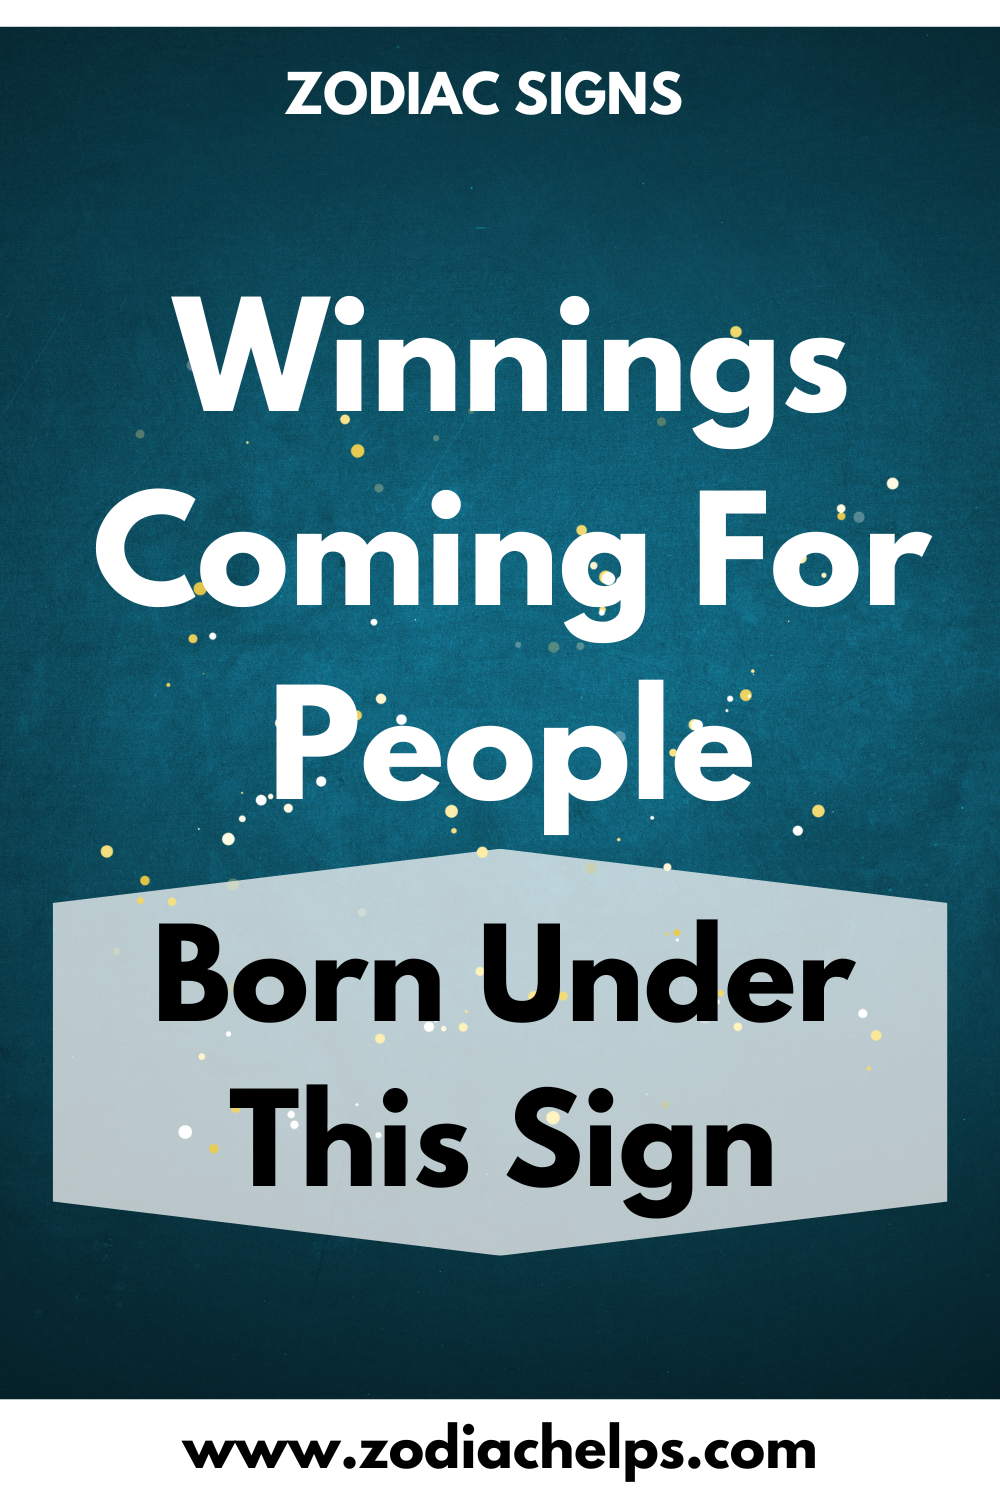 Winnings Coming For People Born Under This Sign